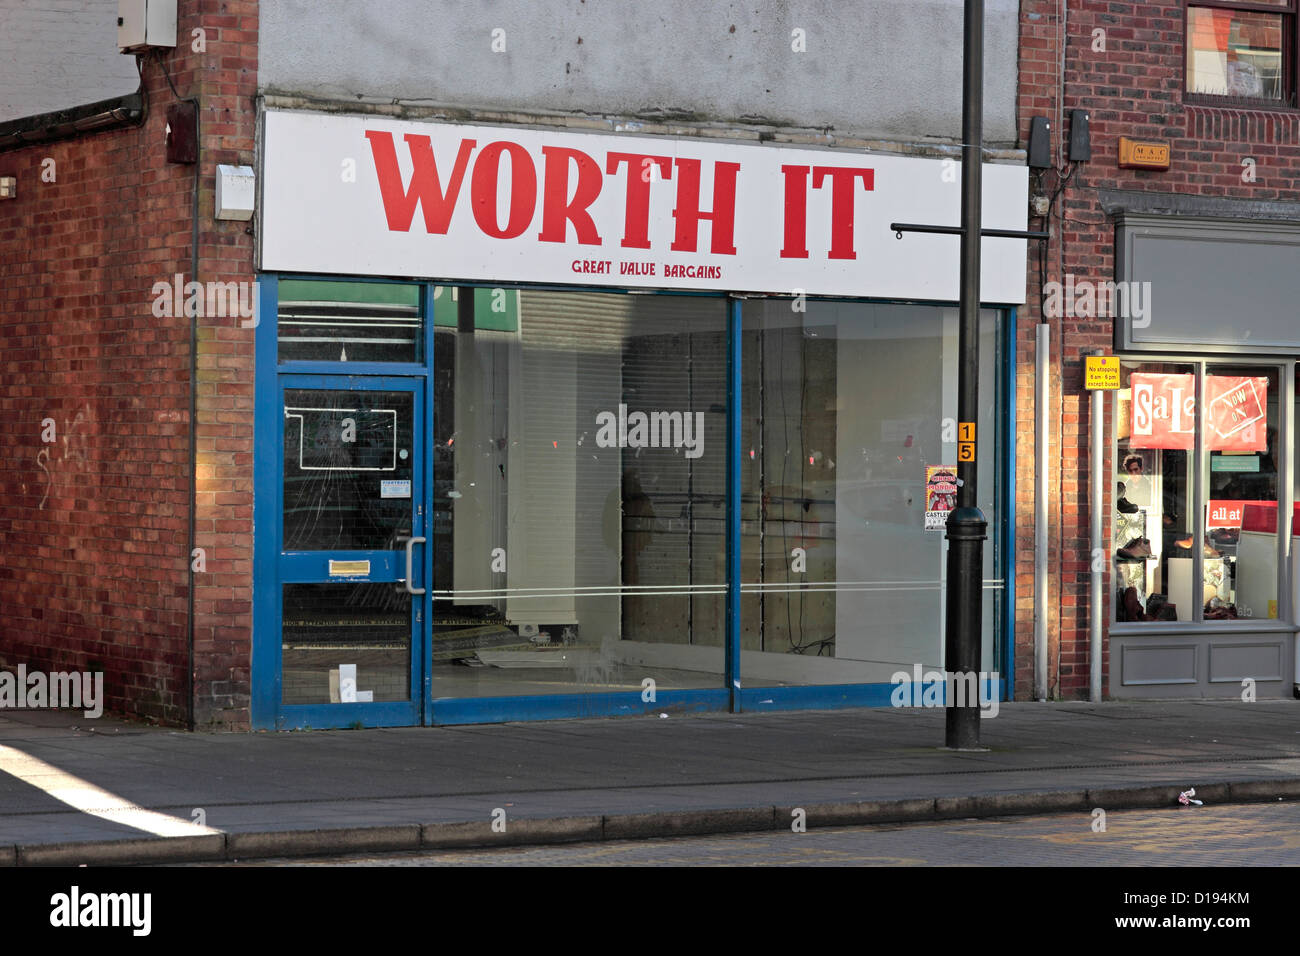 Closed shop on Gowthorpe Selby named Worth It Great Value Bargains Stock Photo